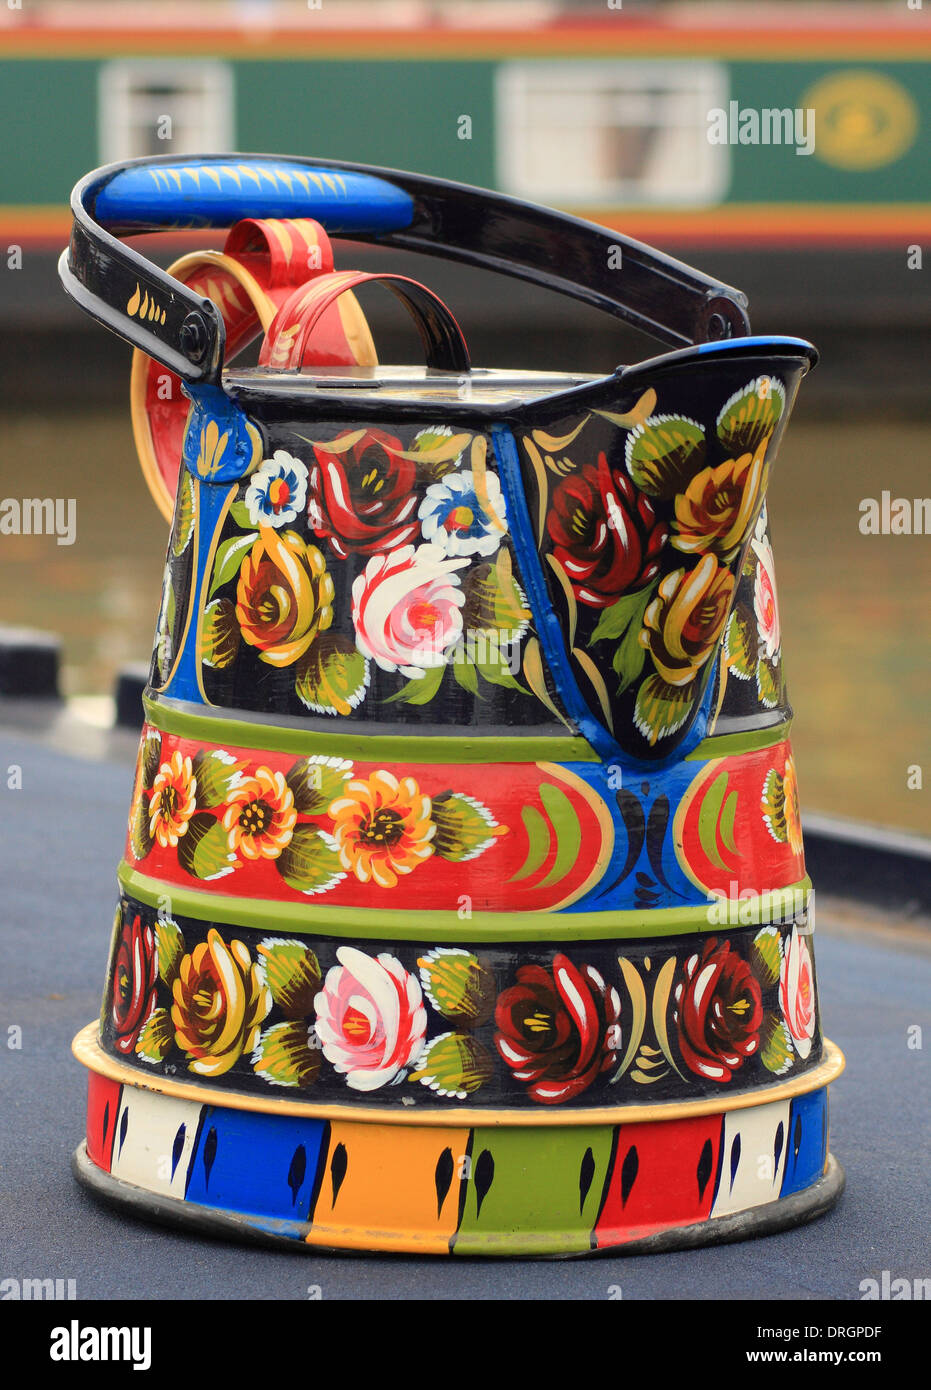 Buckby watering can decorated with traditional British 'Rose and Casttle' folk/canal art on a narrow boat, Stratford-on-Avon, UK Stock Photo